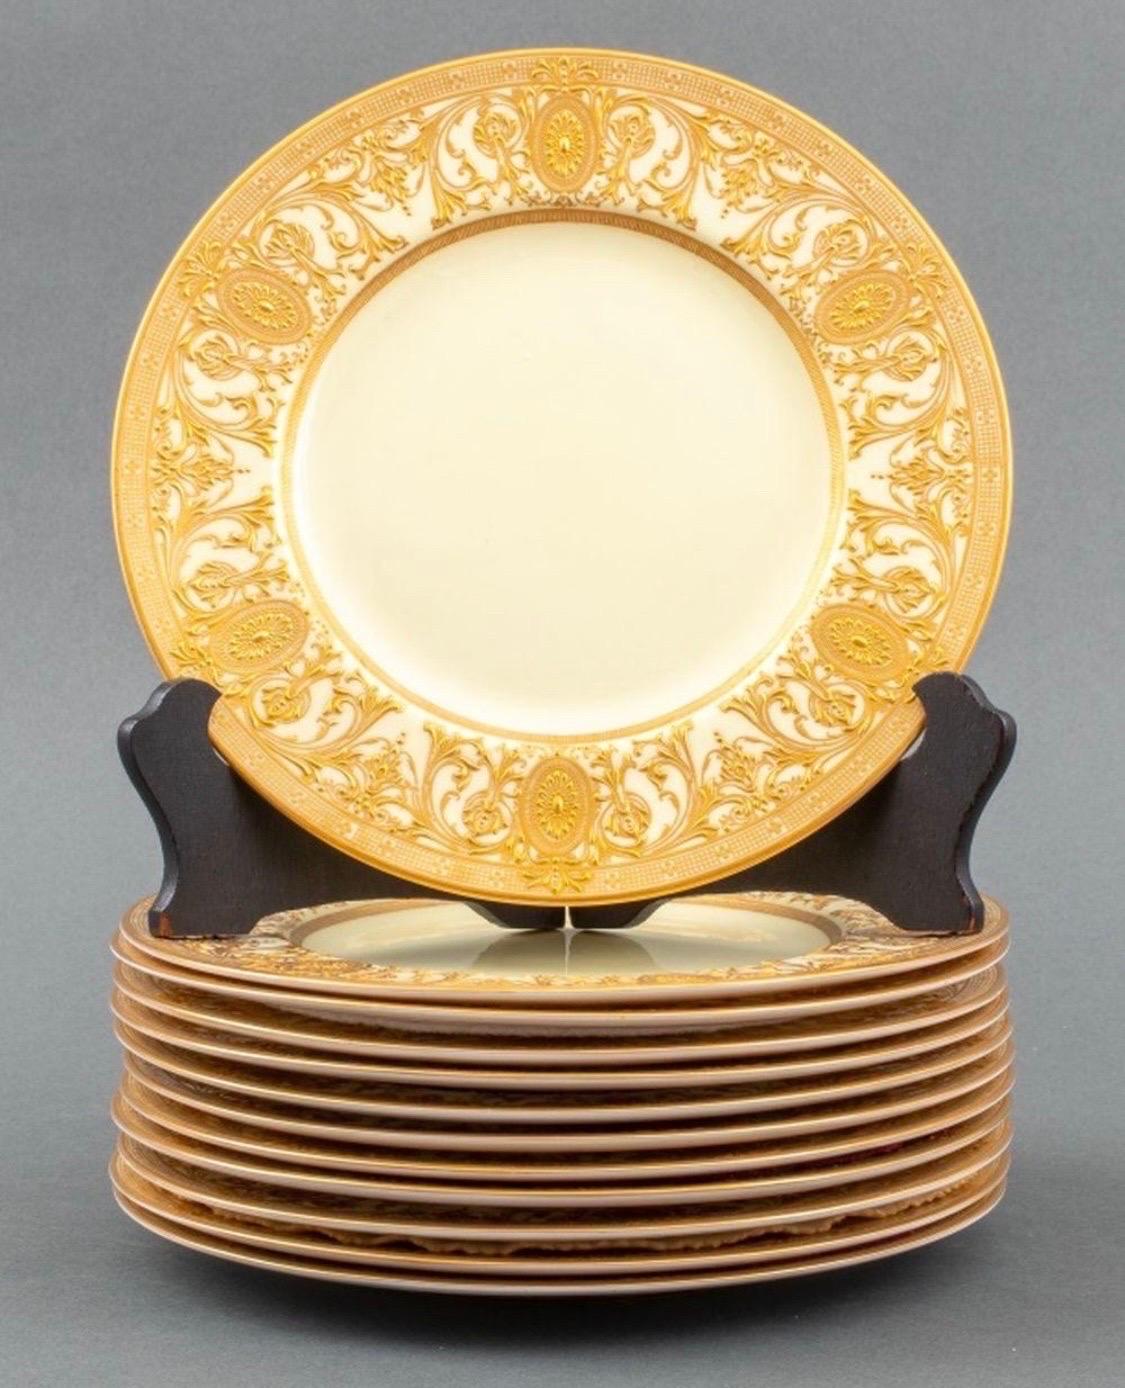 12 Gold Encrusted Tiffany Plates by Royal Worchester In Good Condition For Sale In New Haven, CT